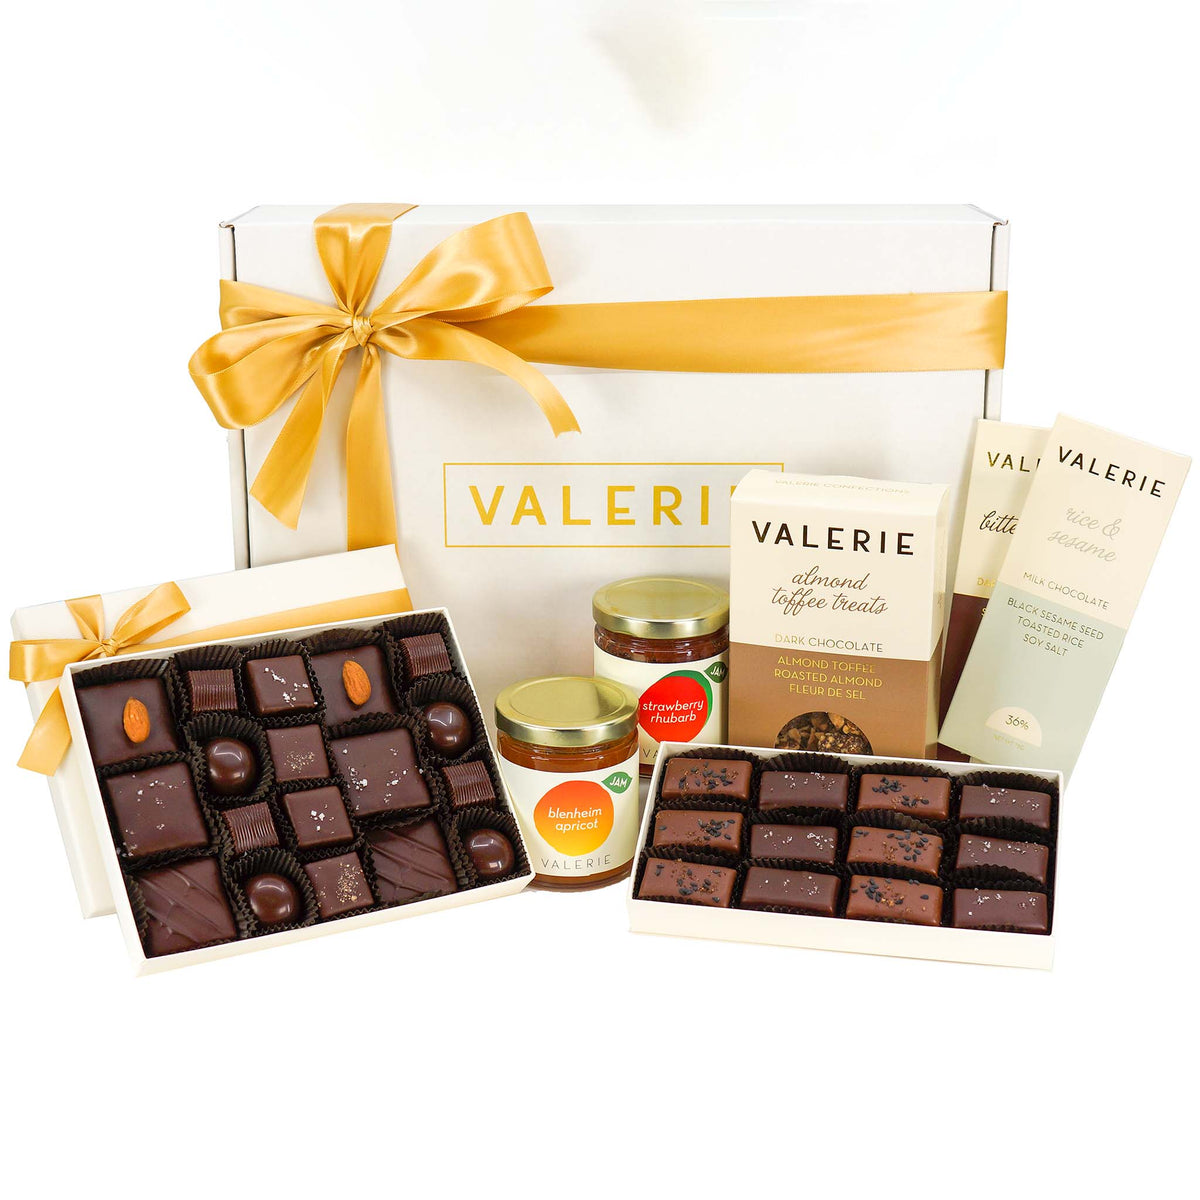  Gift box with assorted Valerie chocolates, toffee treats, and preserve jars, tied with a golden ribbon.